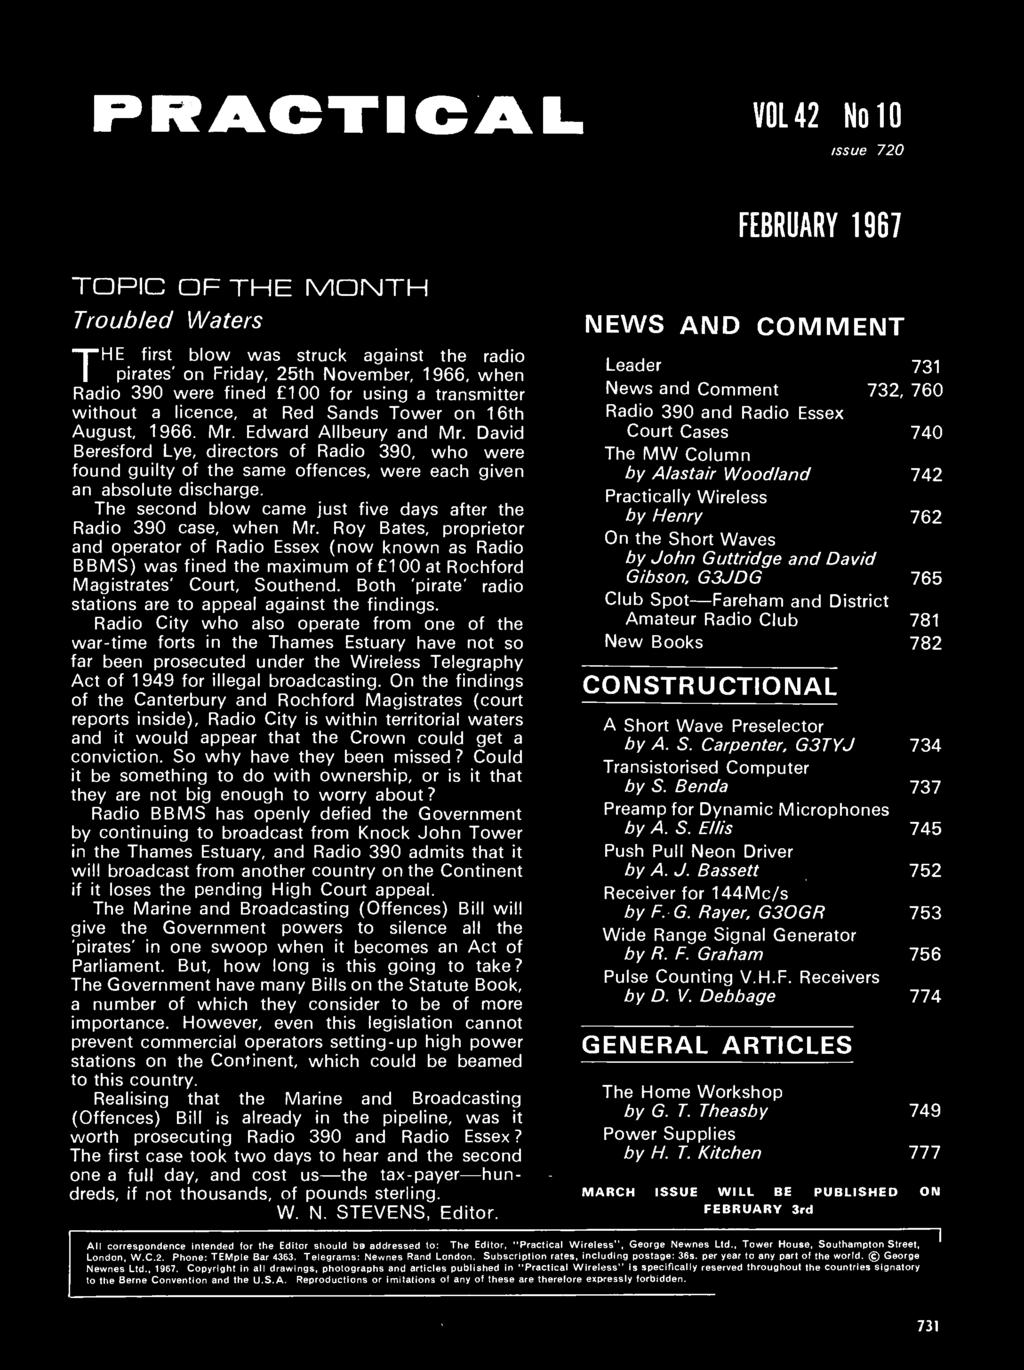 PRACTICAL WIRELESS VOL 42 No 10 issue 720 FEBRUARY 1961 TOPIC OF THE MONTH Troubled Waters THE first blow was struck against the radio 'pirates' on Friday, 25th November, 1966, when Radio 390 were